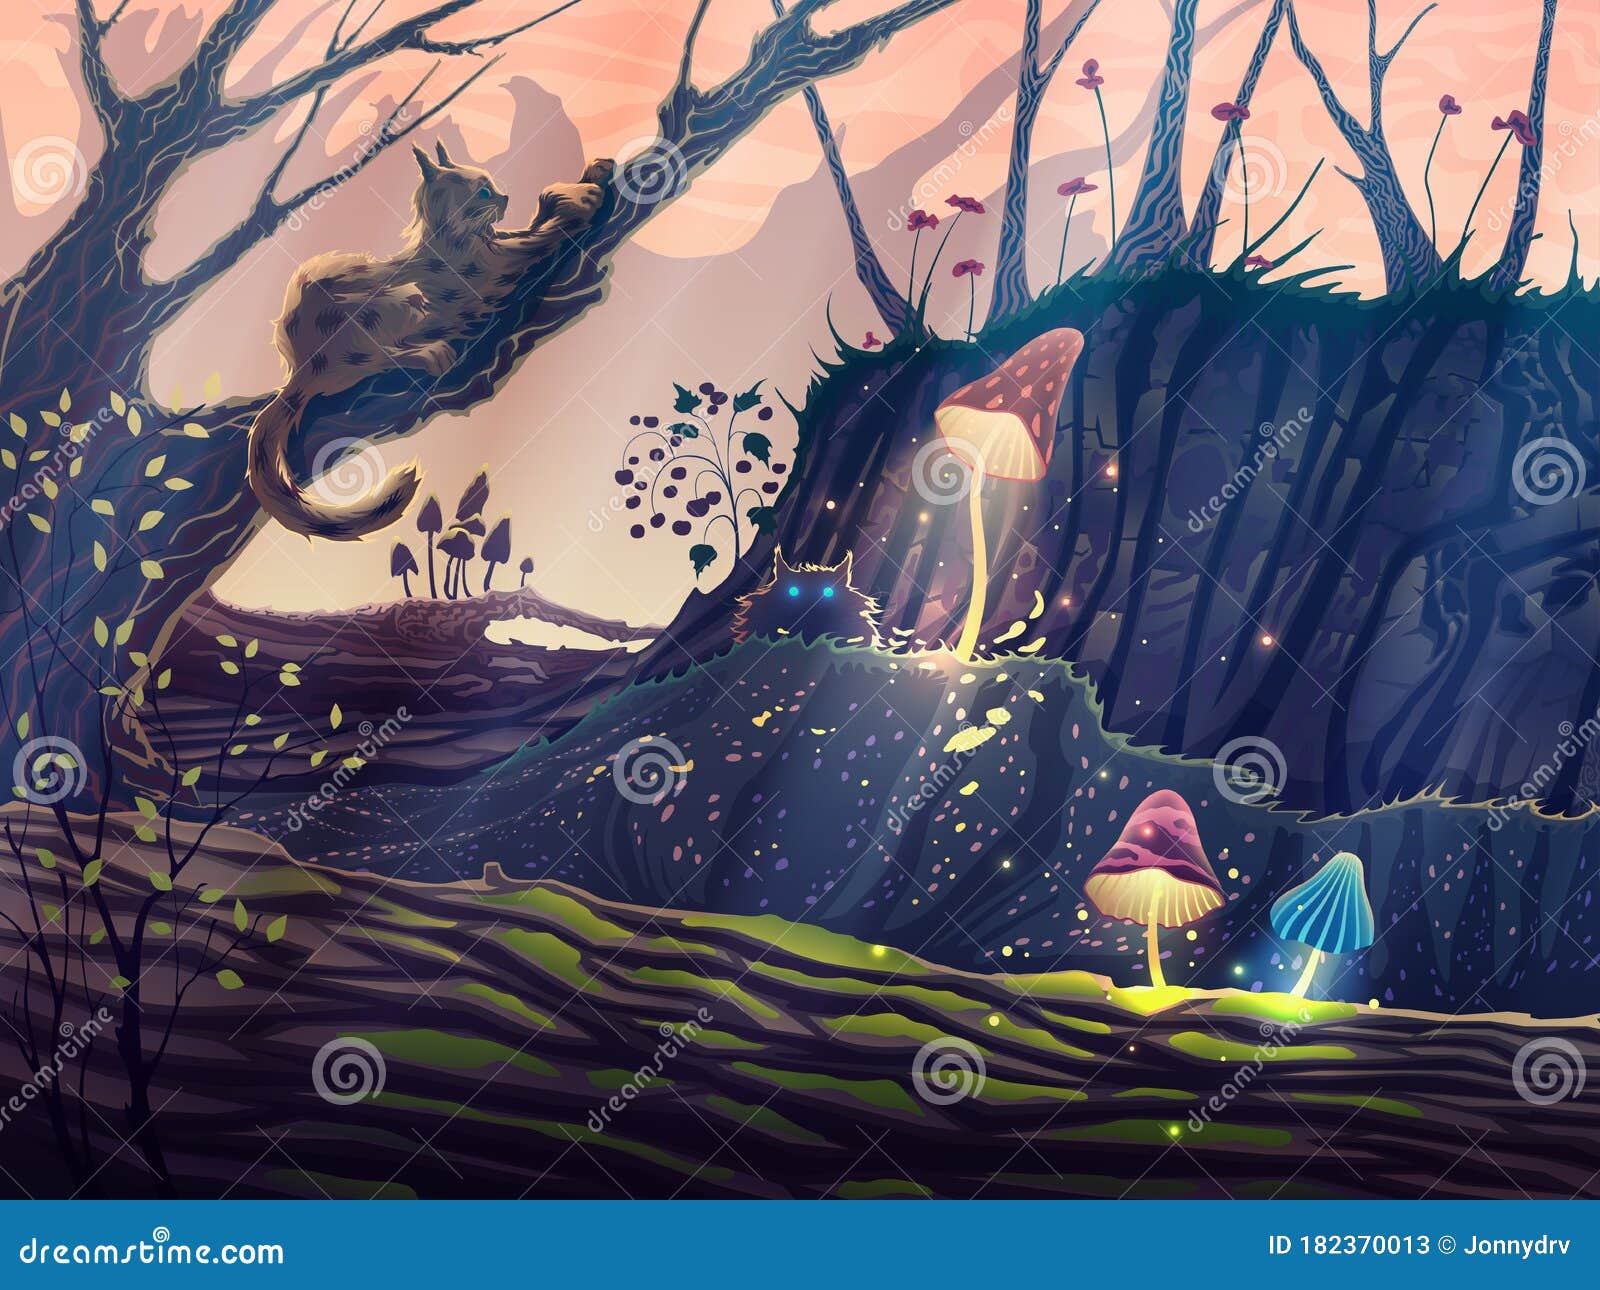 Magic Forest Summer Landscape with Fantasy Trees, Wild Animals, Cats ...